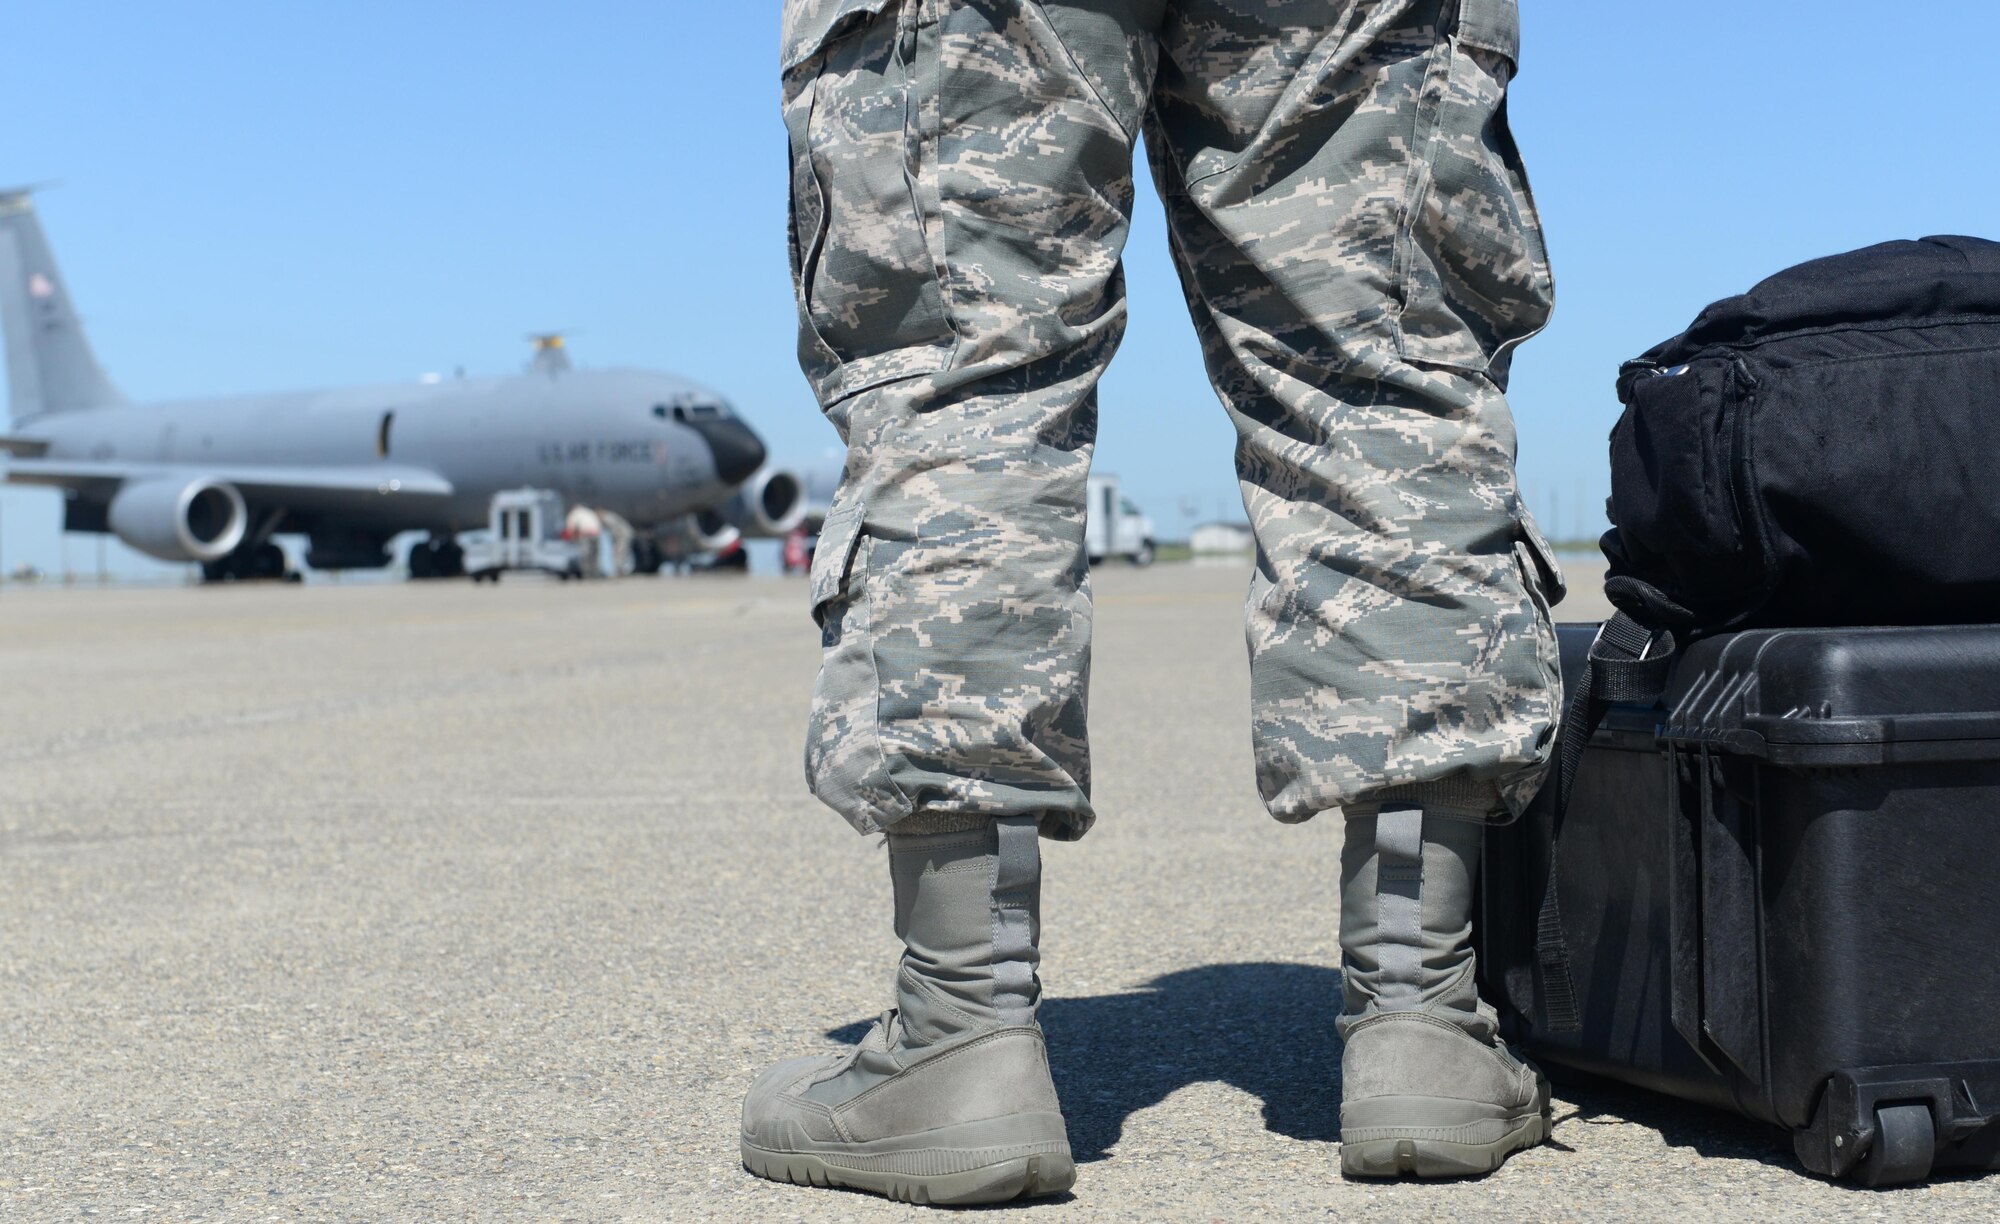 A Beale Airman prepares for a simulated deployment at Beale Air Force Base, California, Apr. 7, 2016.  The 9th Reconnaissance Wing maintains a high state of readiness for potential deployment in response to theater contingencies through its expeditionary combat support forces. (U.S. Air Force photo by Senior Airman Michael J. Hunsaker)